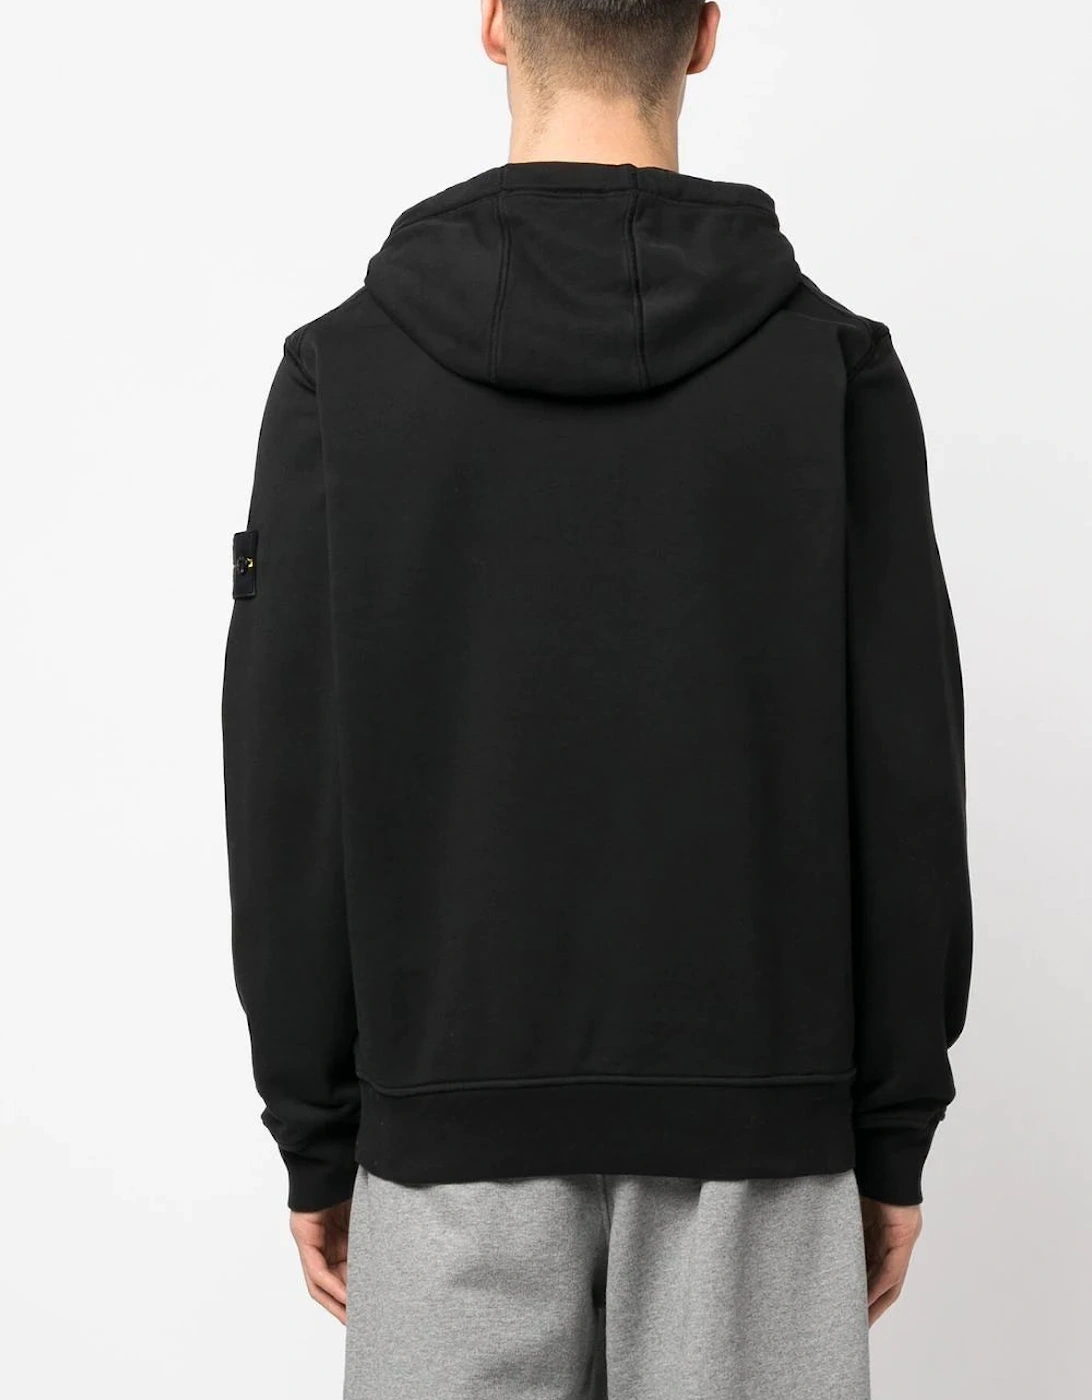 Compass Patch Drawstring Hoodie in Black